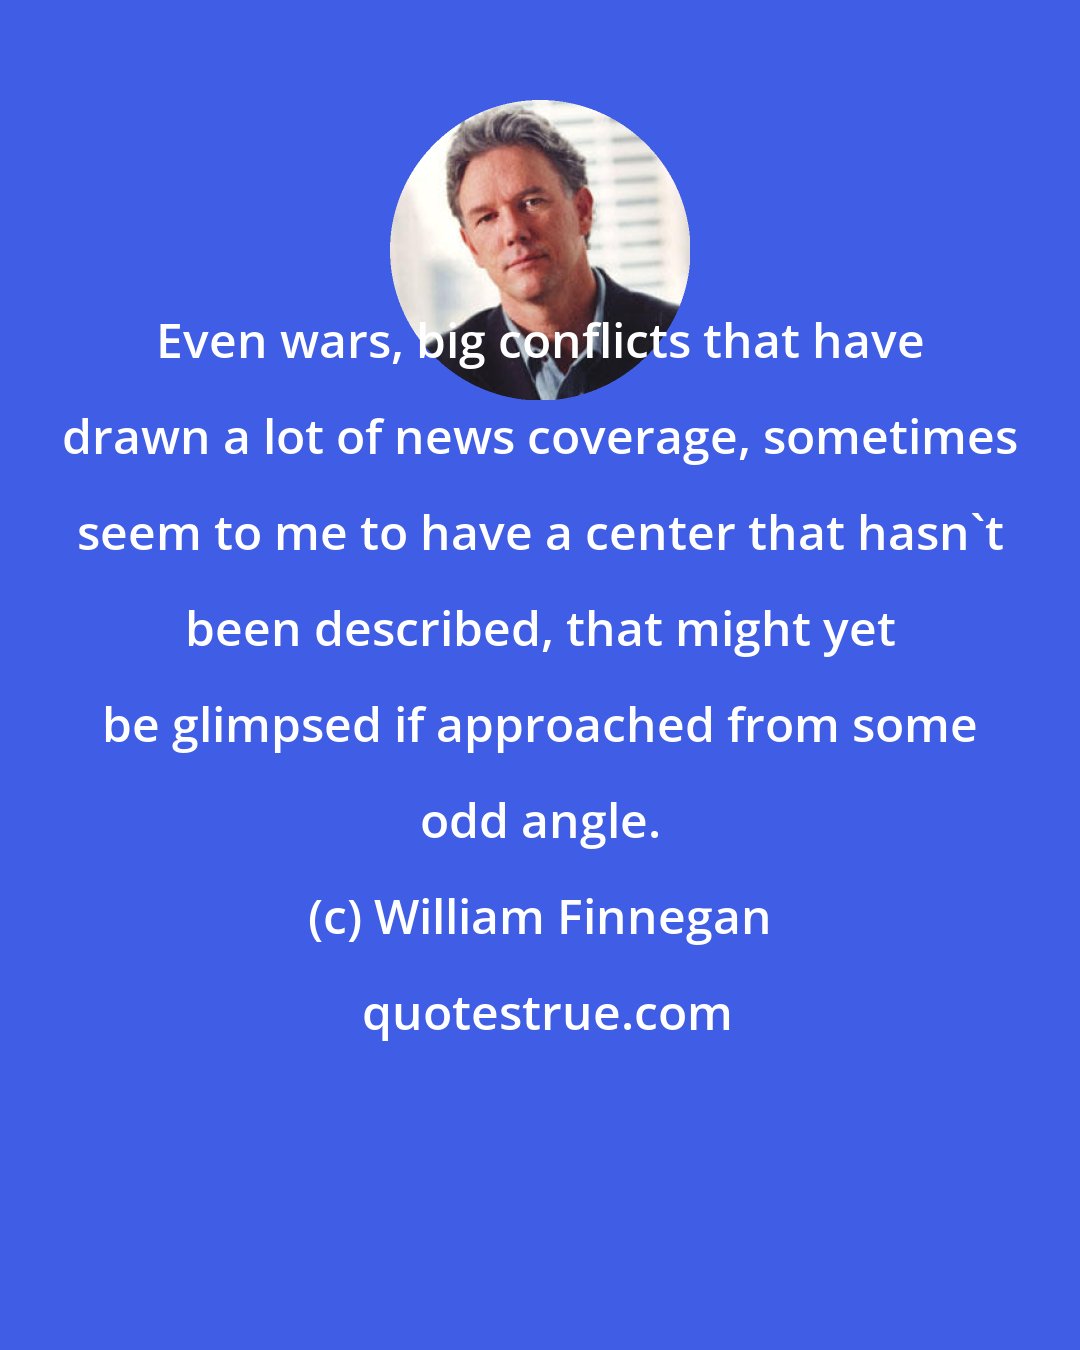 William Finnegan: Even wars, big conflicts that have drawn a lot of news coverage, sometimes seem to me to have a center that hasn't been described, that might yet be glimpsed if approached from some odd angle.